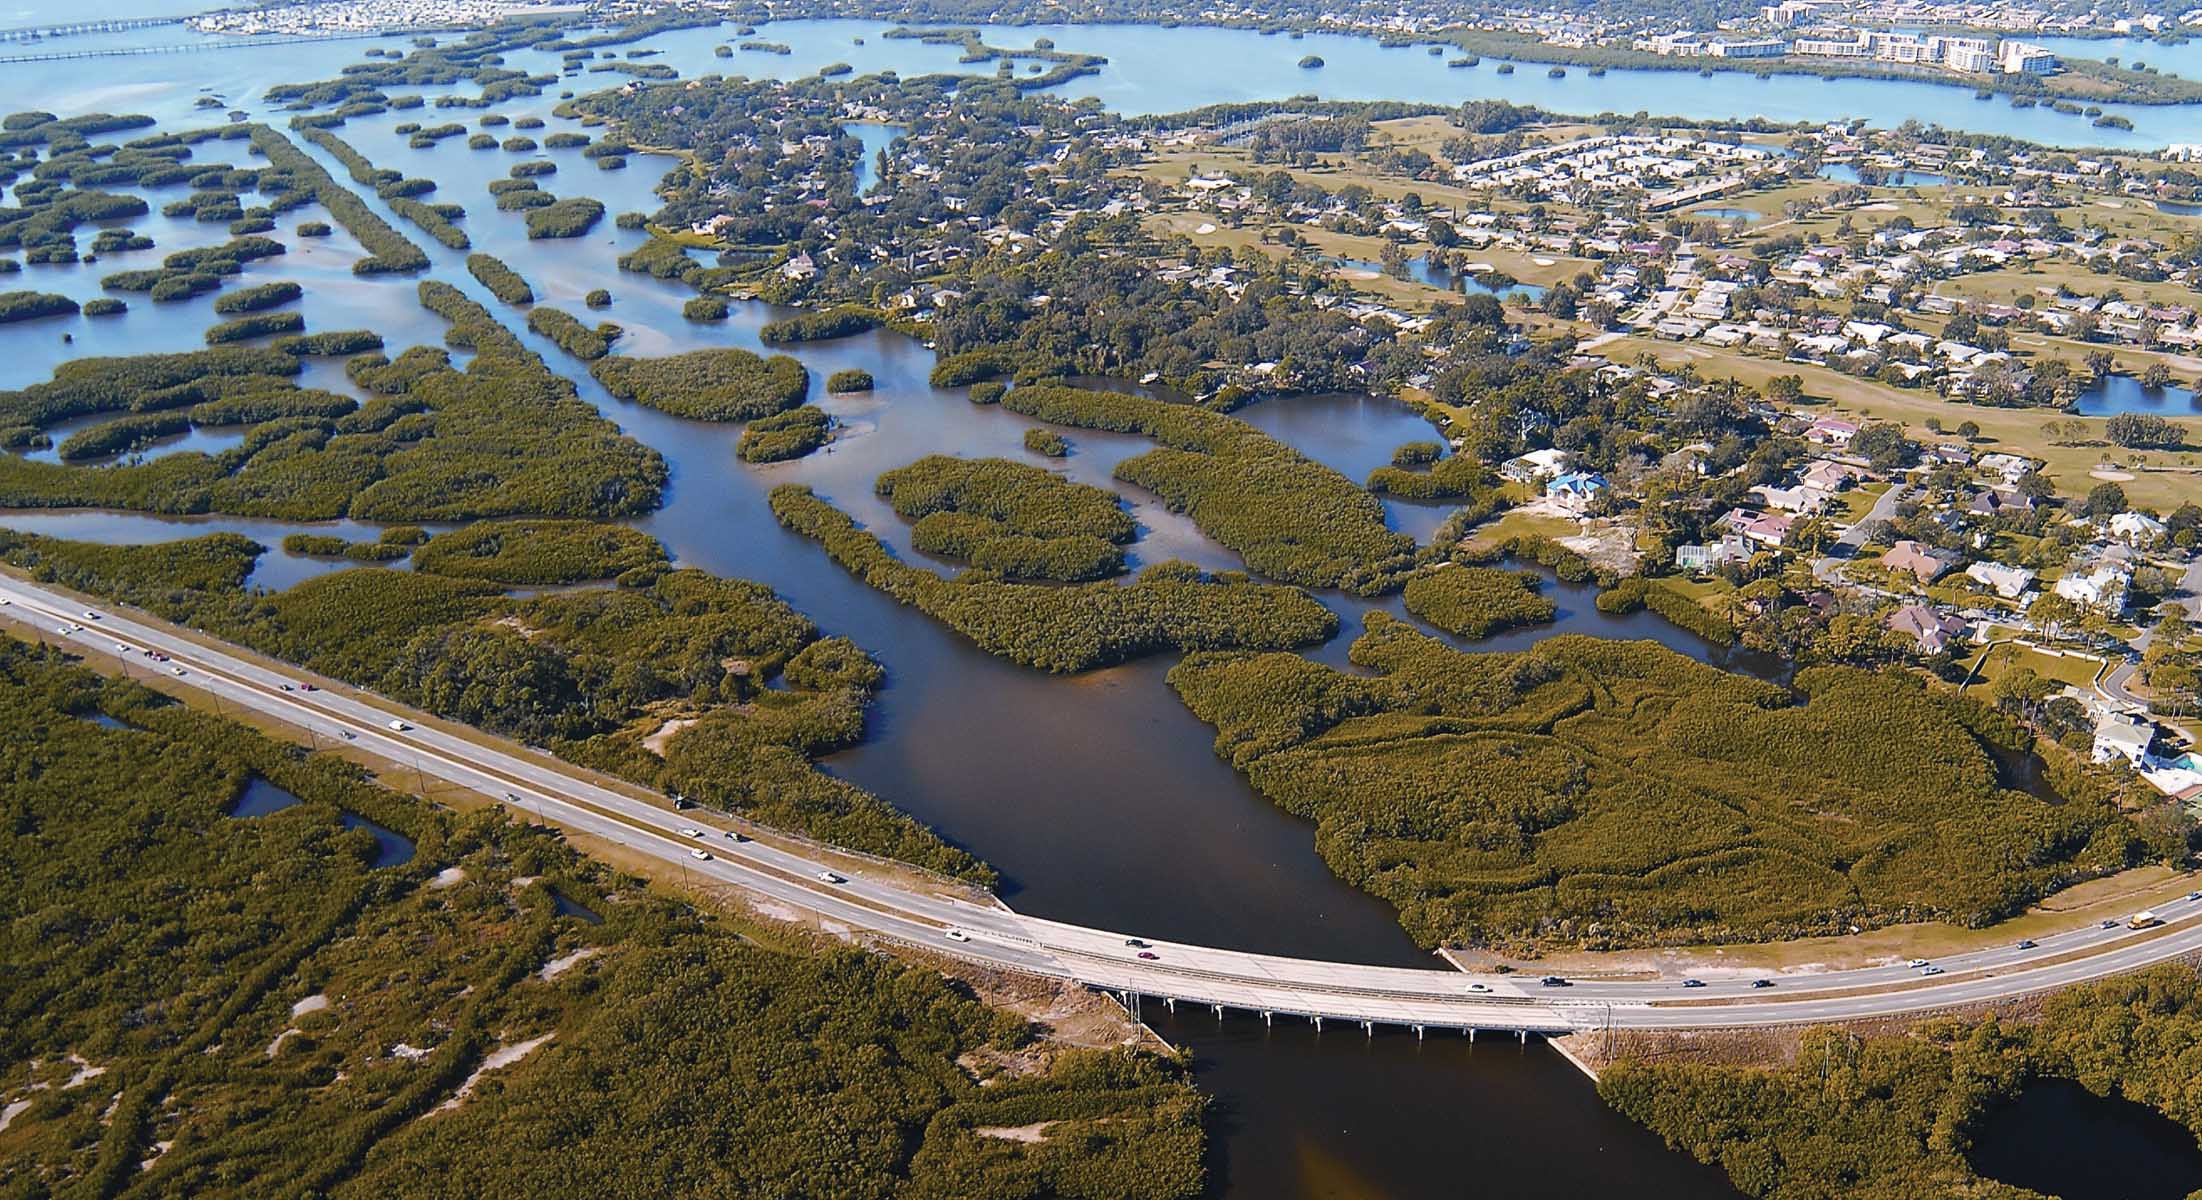 Aerial view of a watery landscape and a highway bridge crossing over a large channel of water.